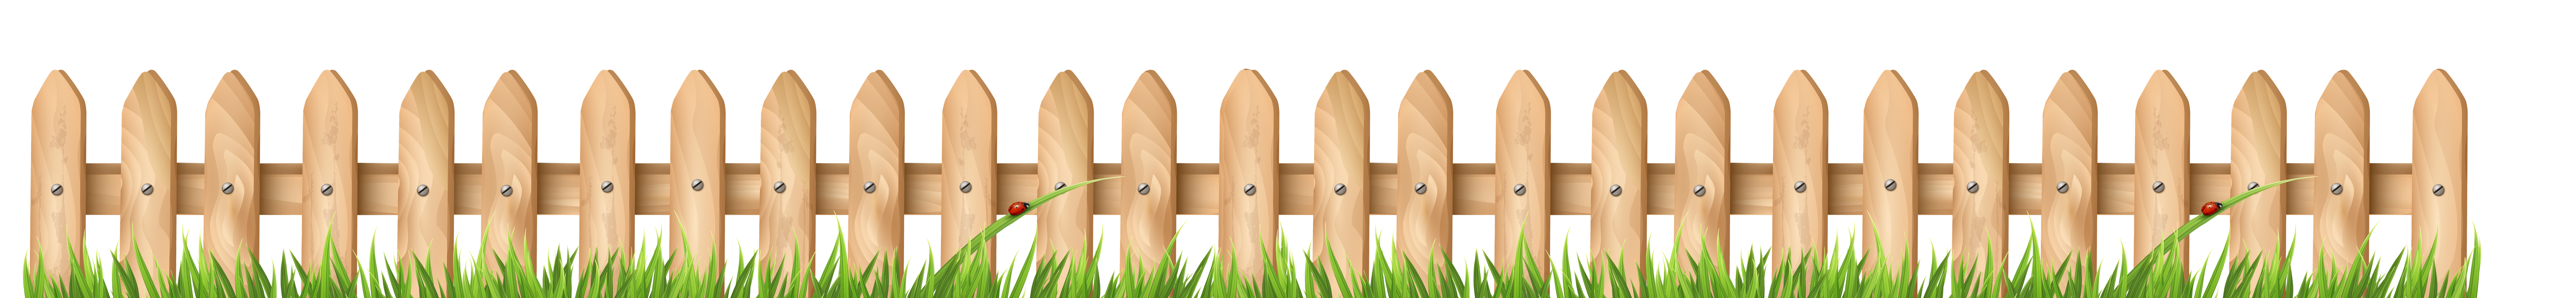 Download free png transparent. Grass clipart fence